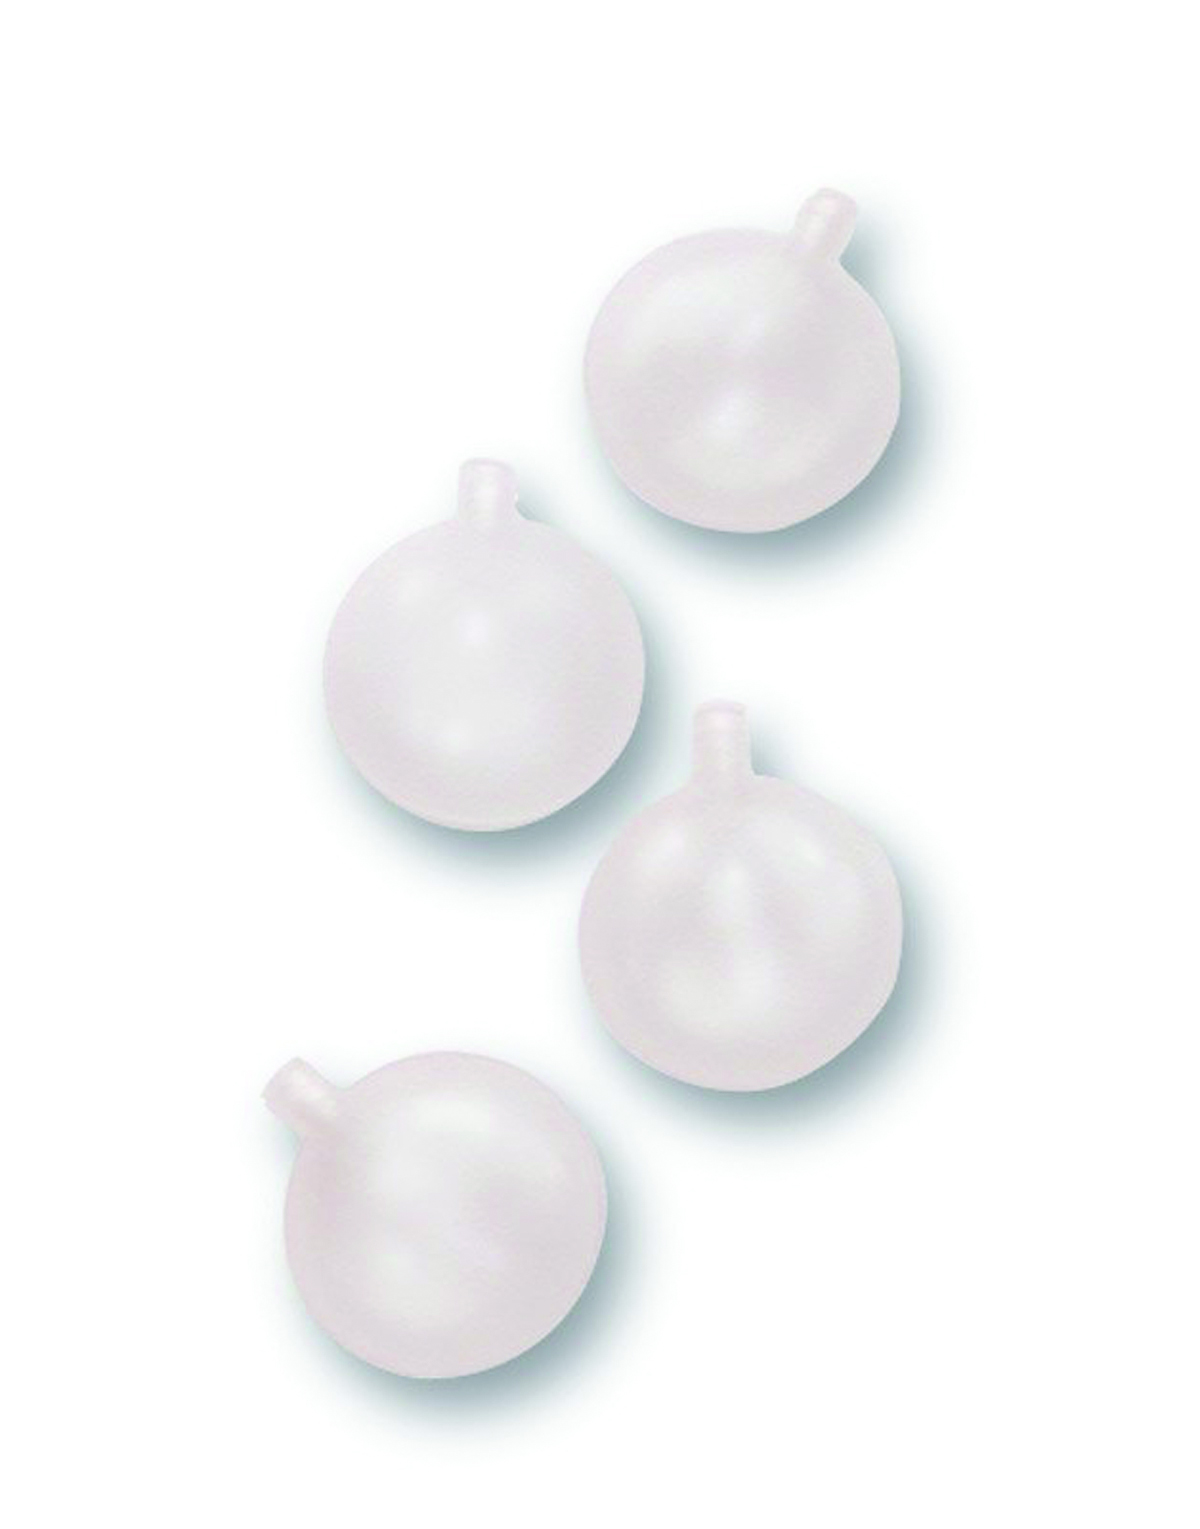 Dr. Noys Dog Toy Squeakers - 4/Pk.